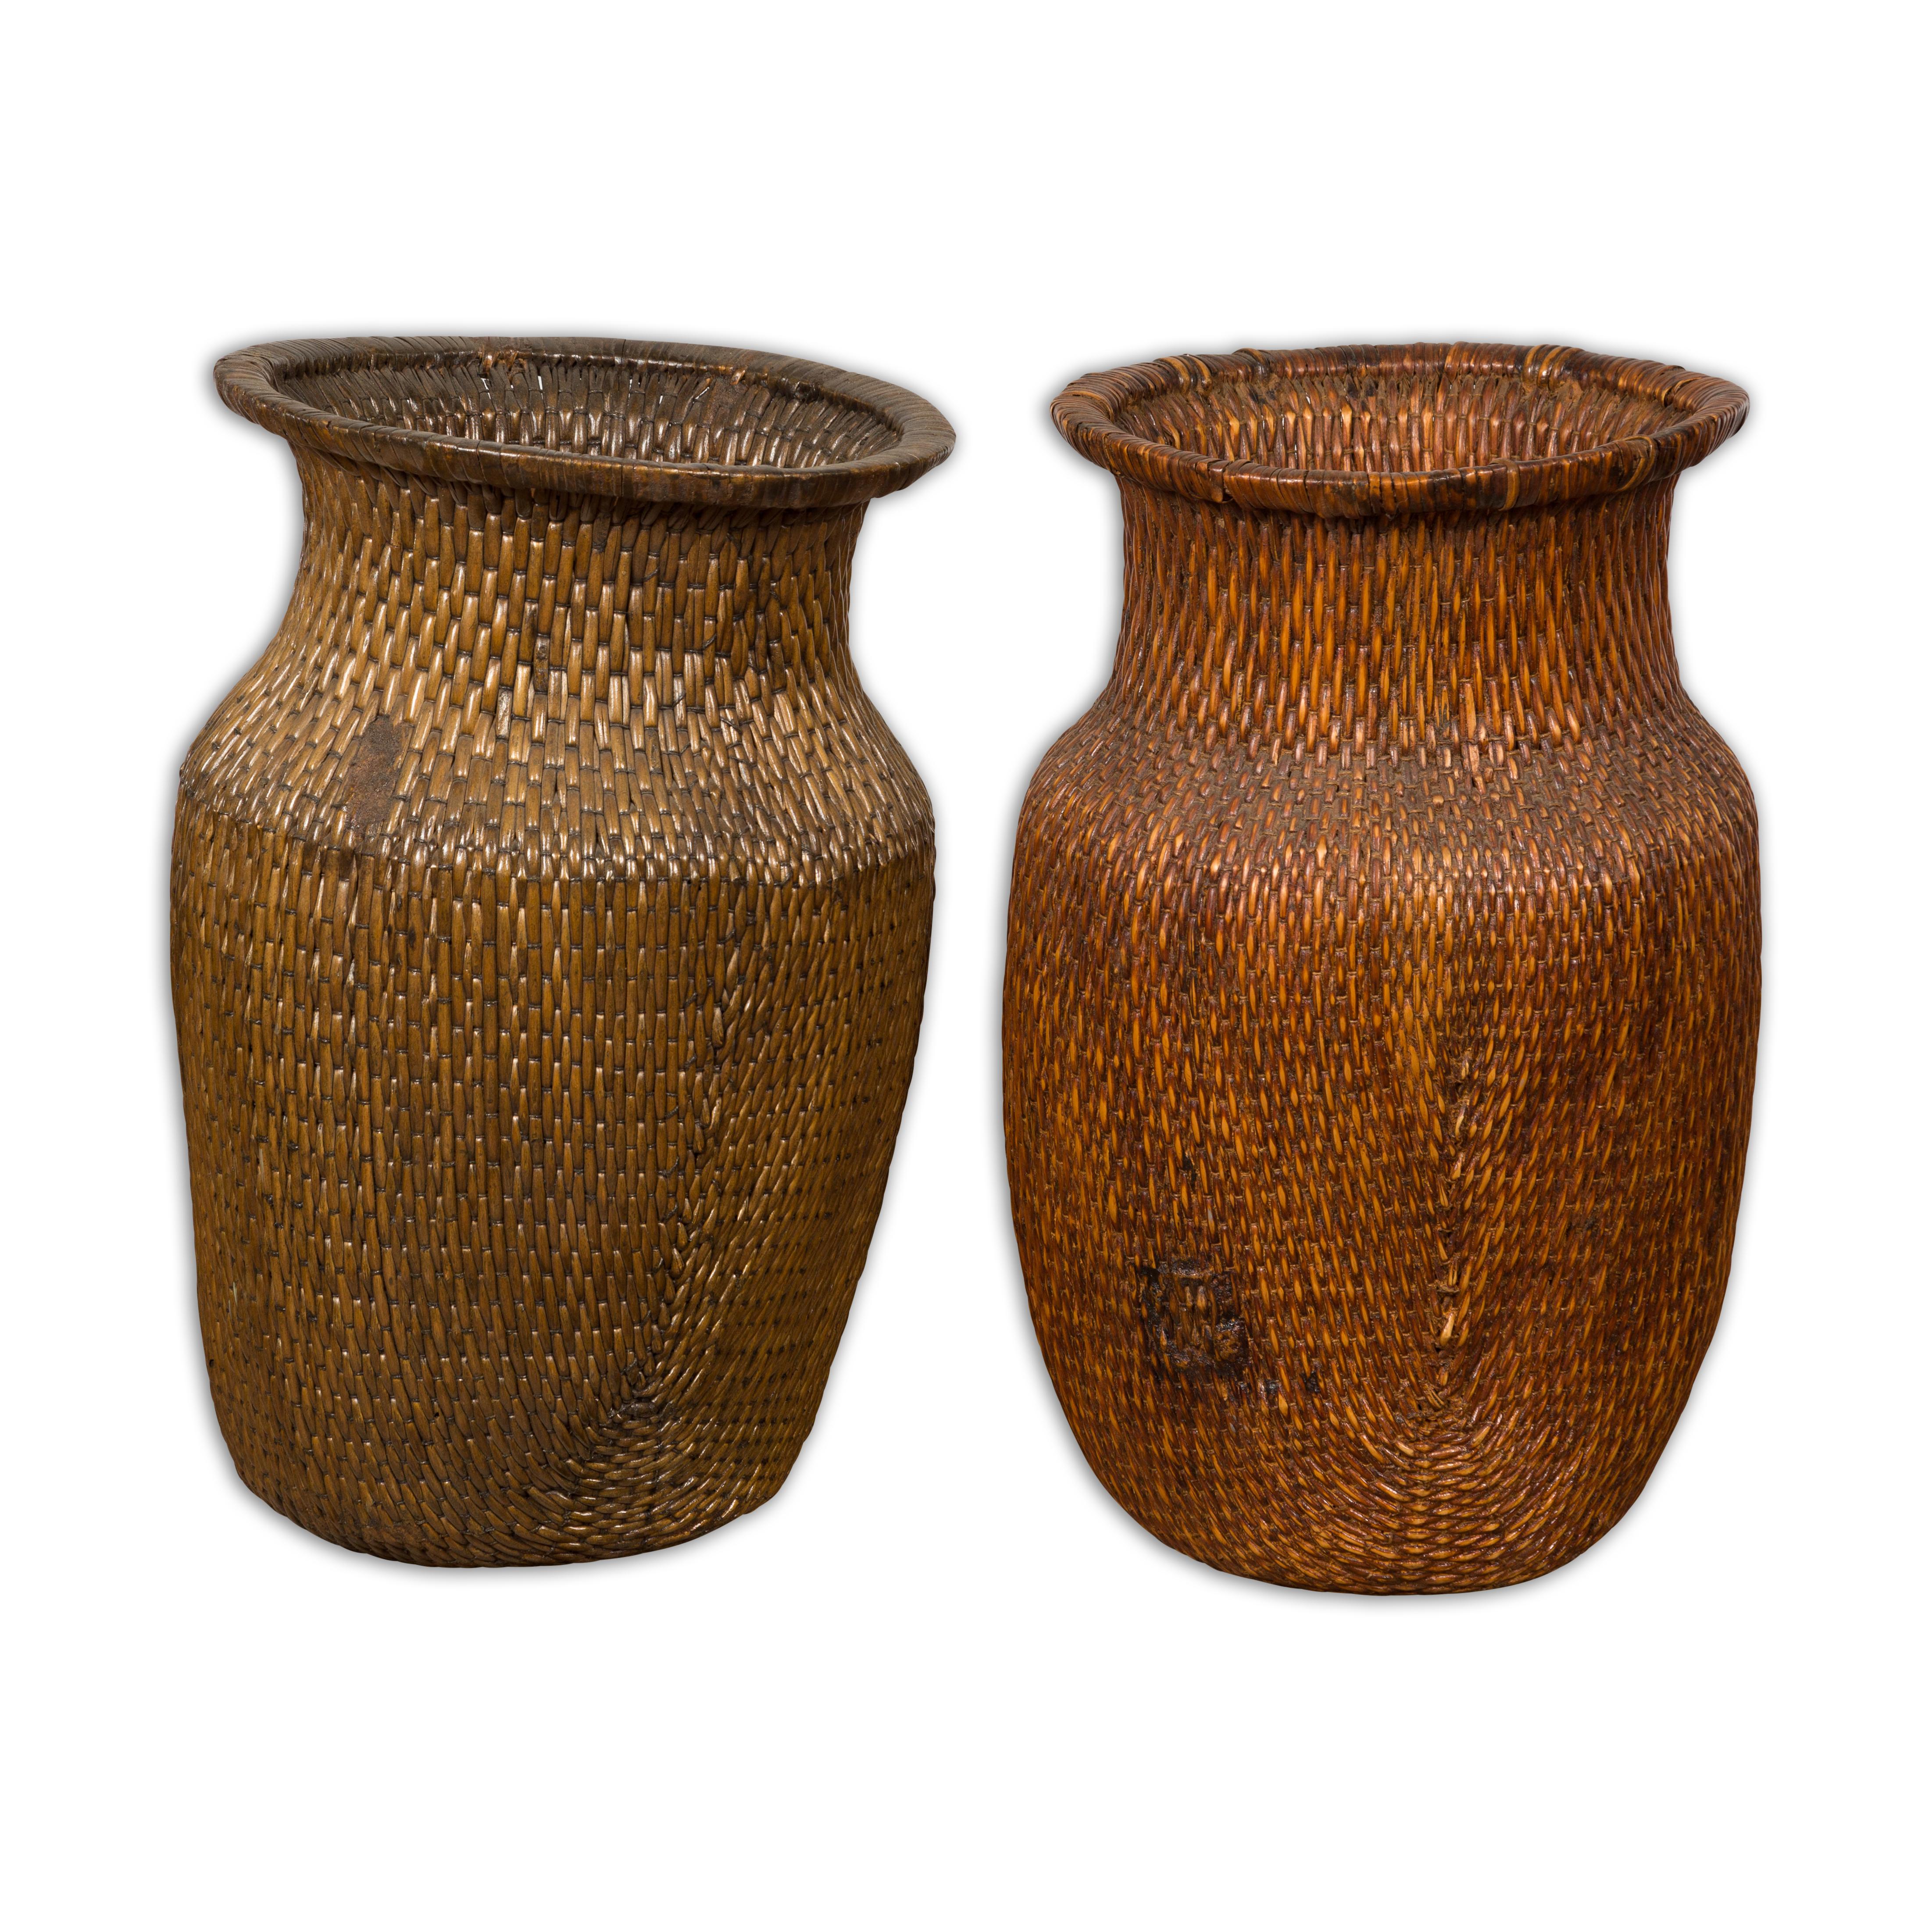 Two Oversized Chinese Rattan Grain Baskets with Flaring Necks, Sold Each For Sale 12